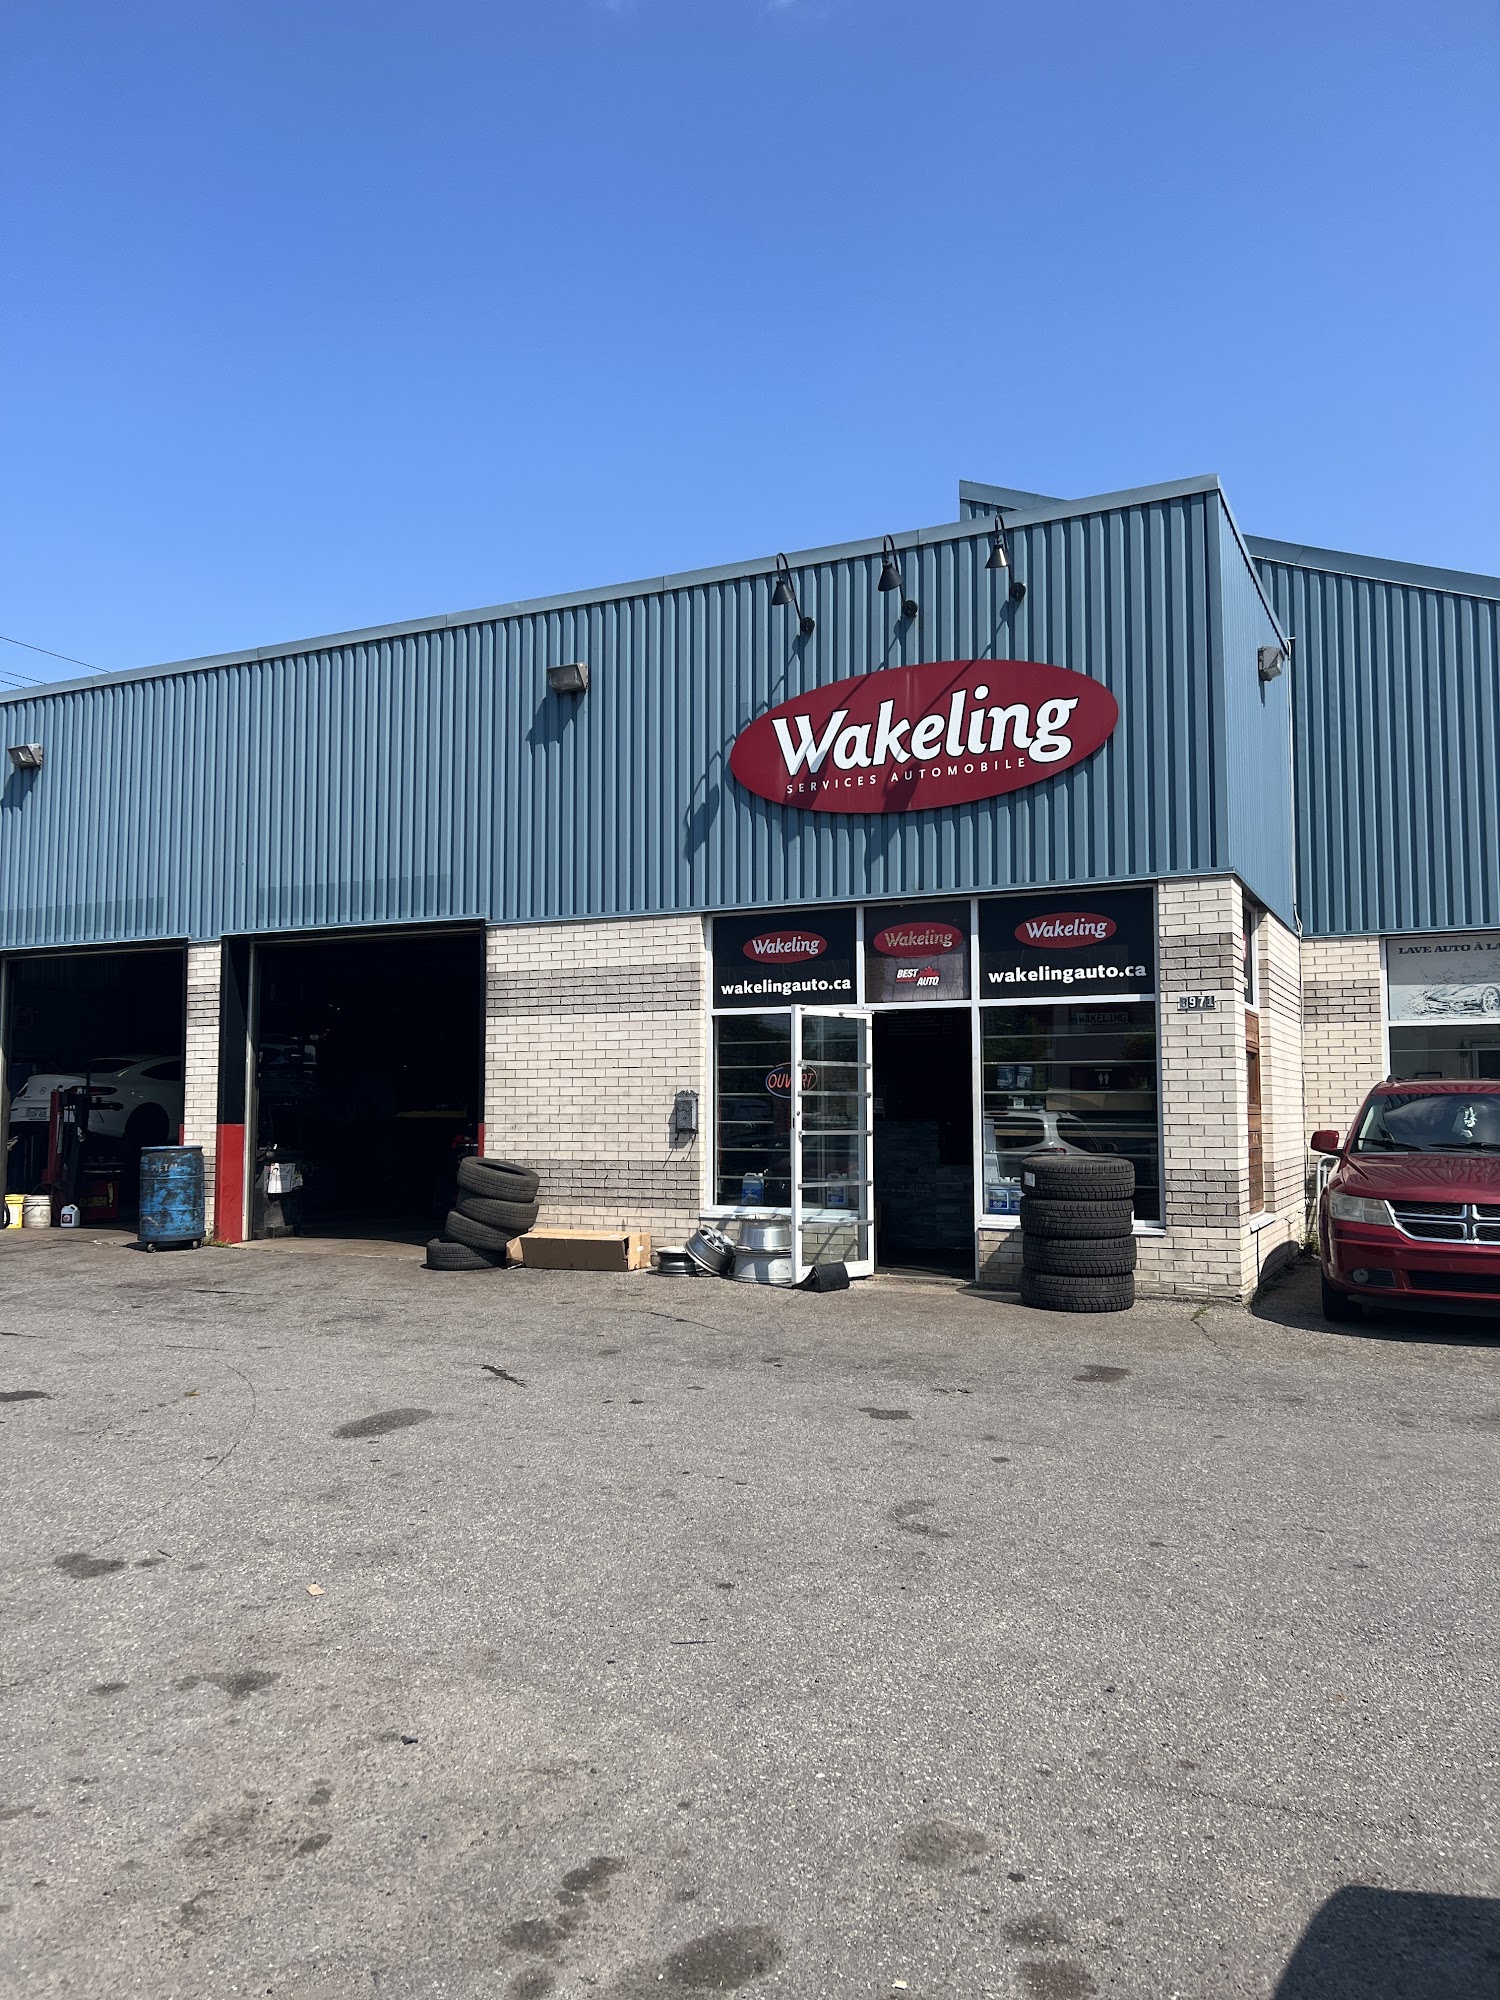 Wakeling Automobile Services Inc 8971 Rue Airlie, LaSalle Quebec H8R 2A2